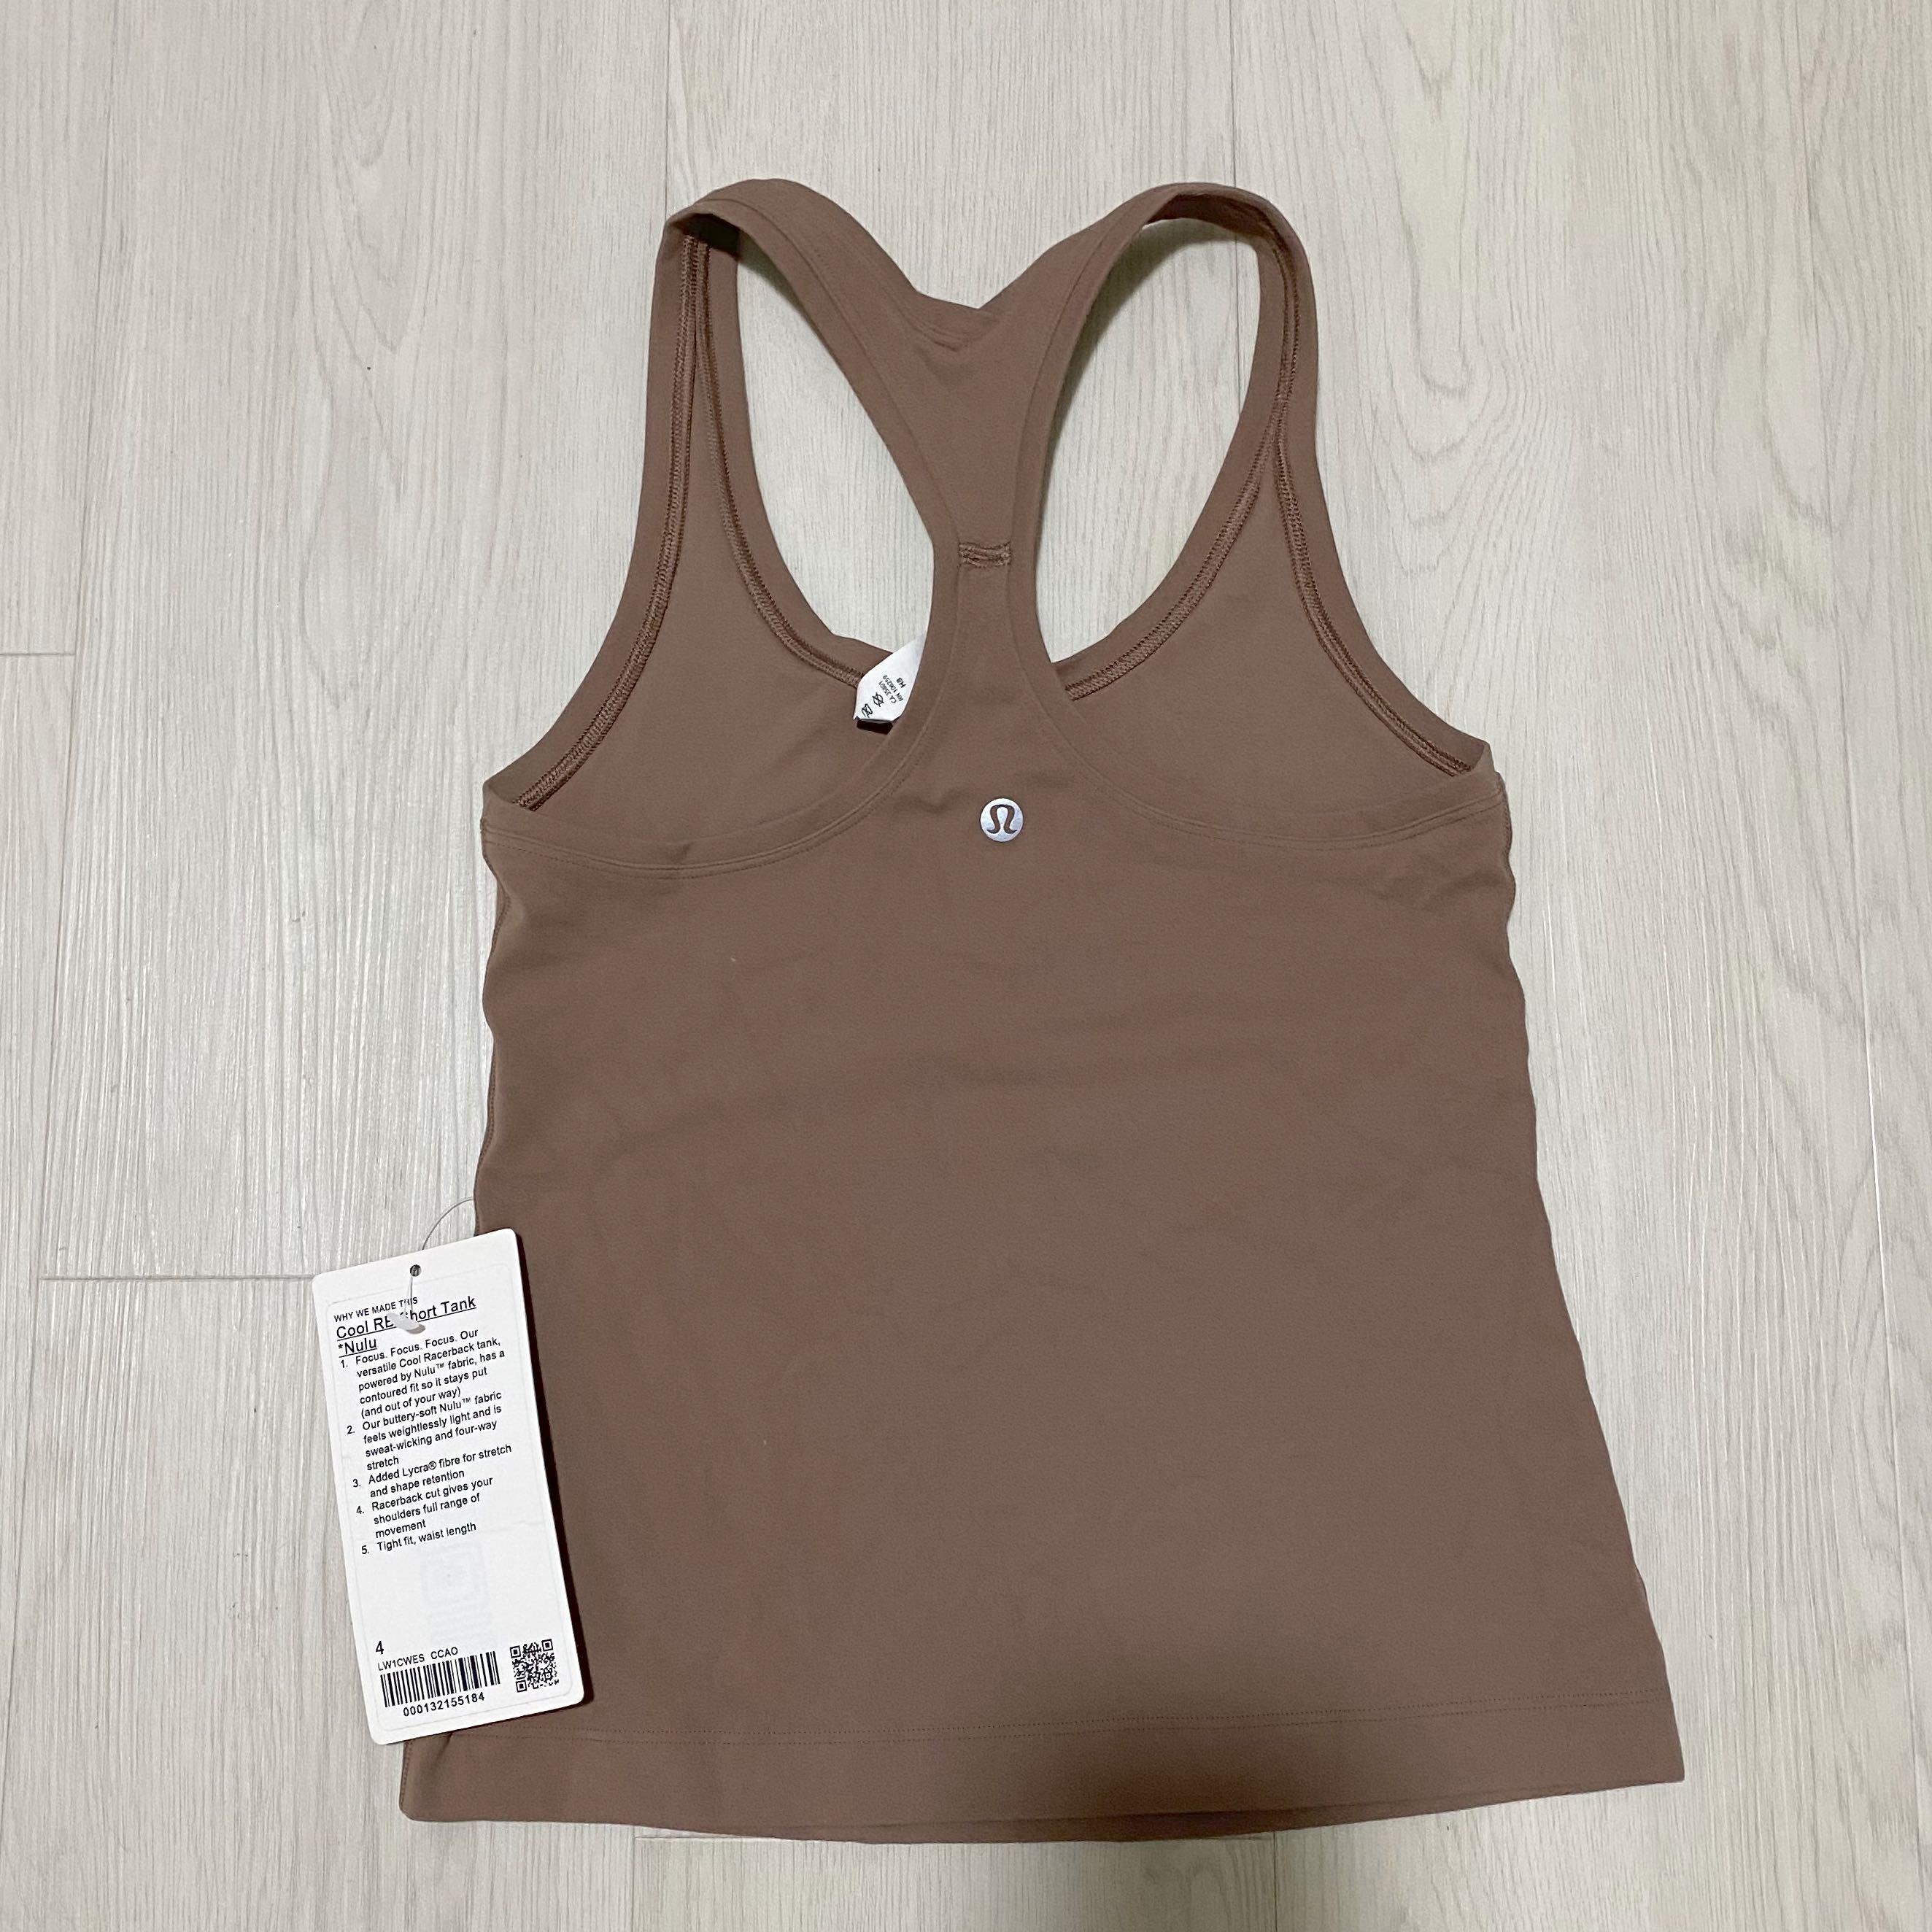 Lululemon BNWT Cool Racerback Tank Top Shorter Length - Cacao size 4,  Women's Fashion, Activewear on Carousell